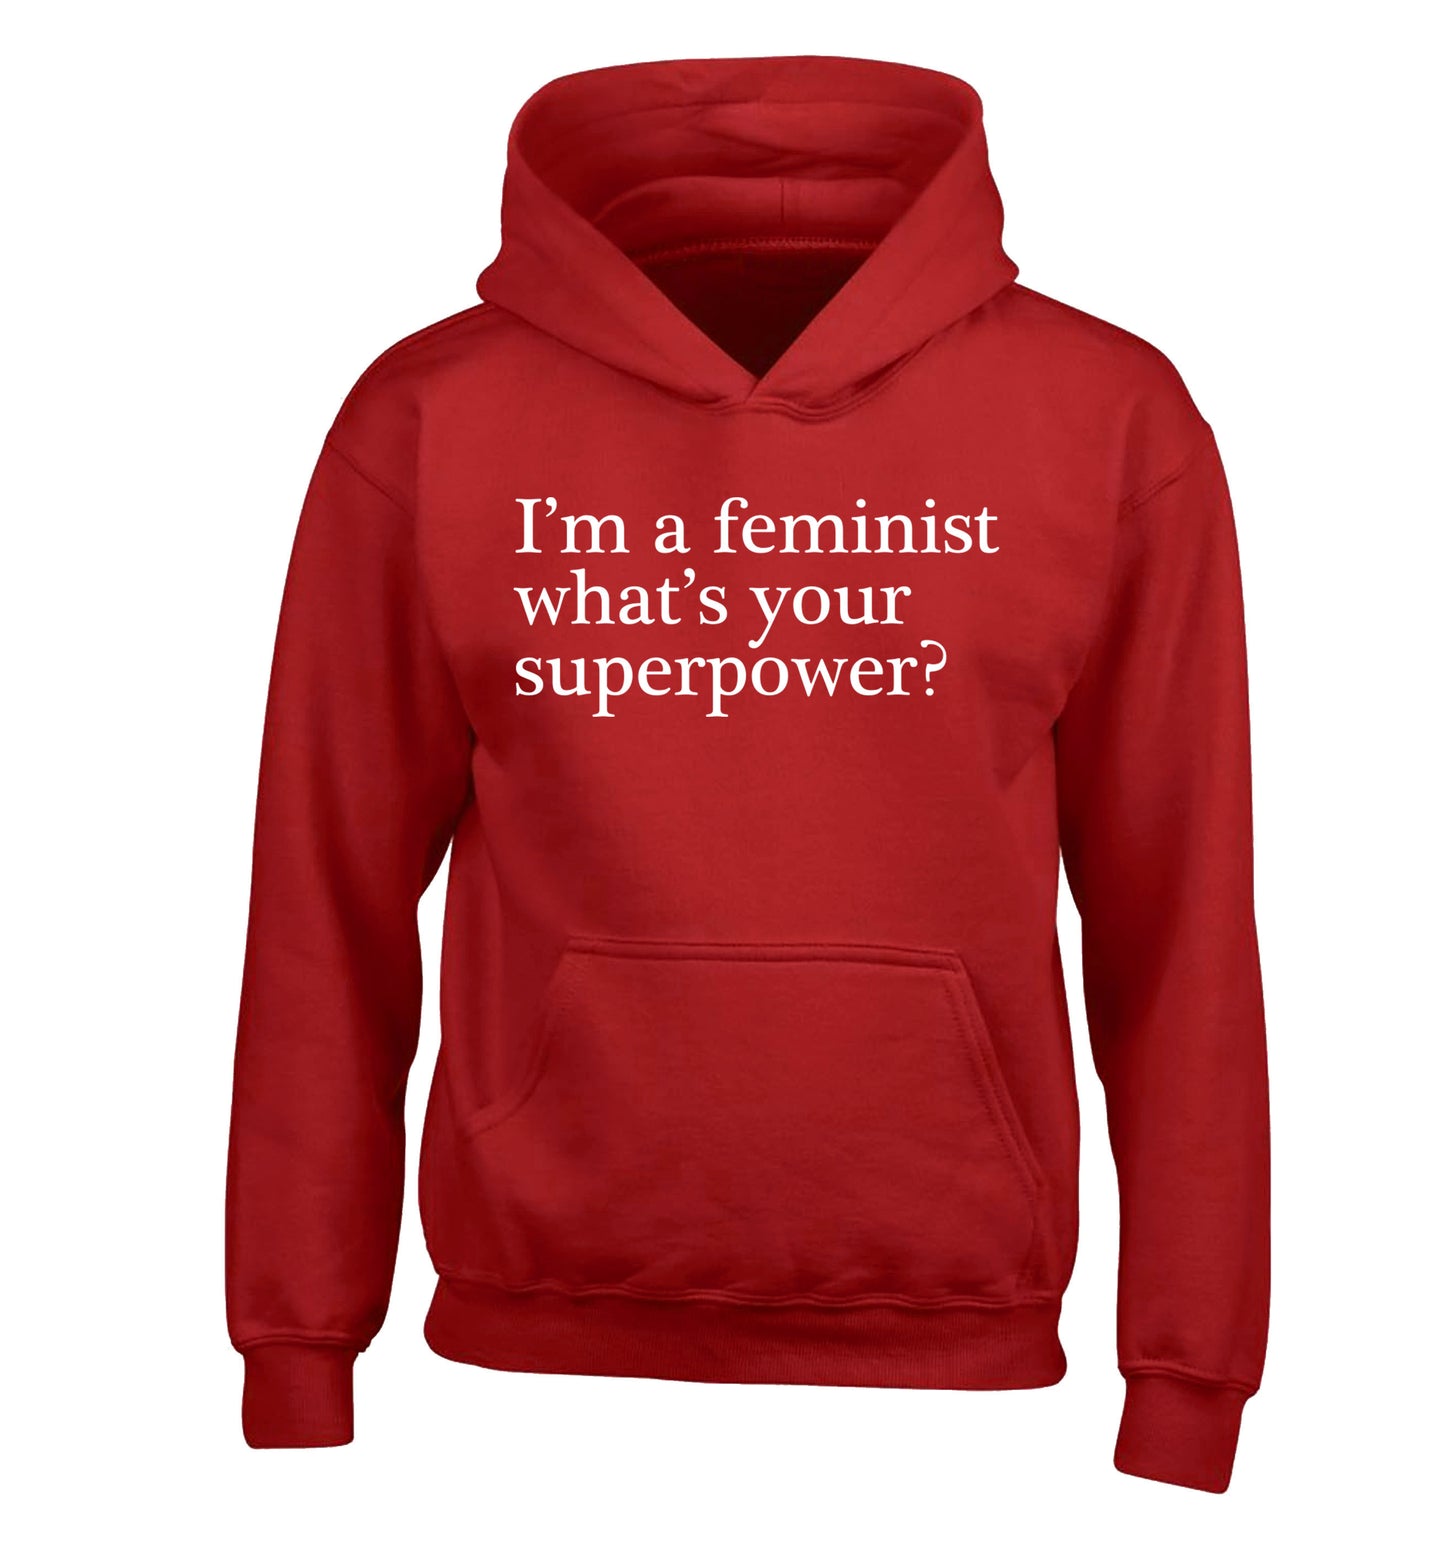 I'm a feminist what's your superpower? children's red hoodie 12-14 Years